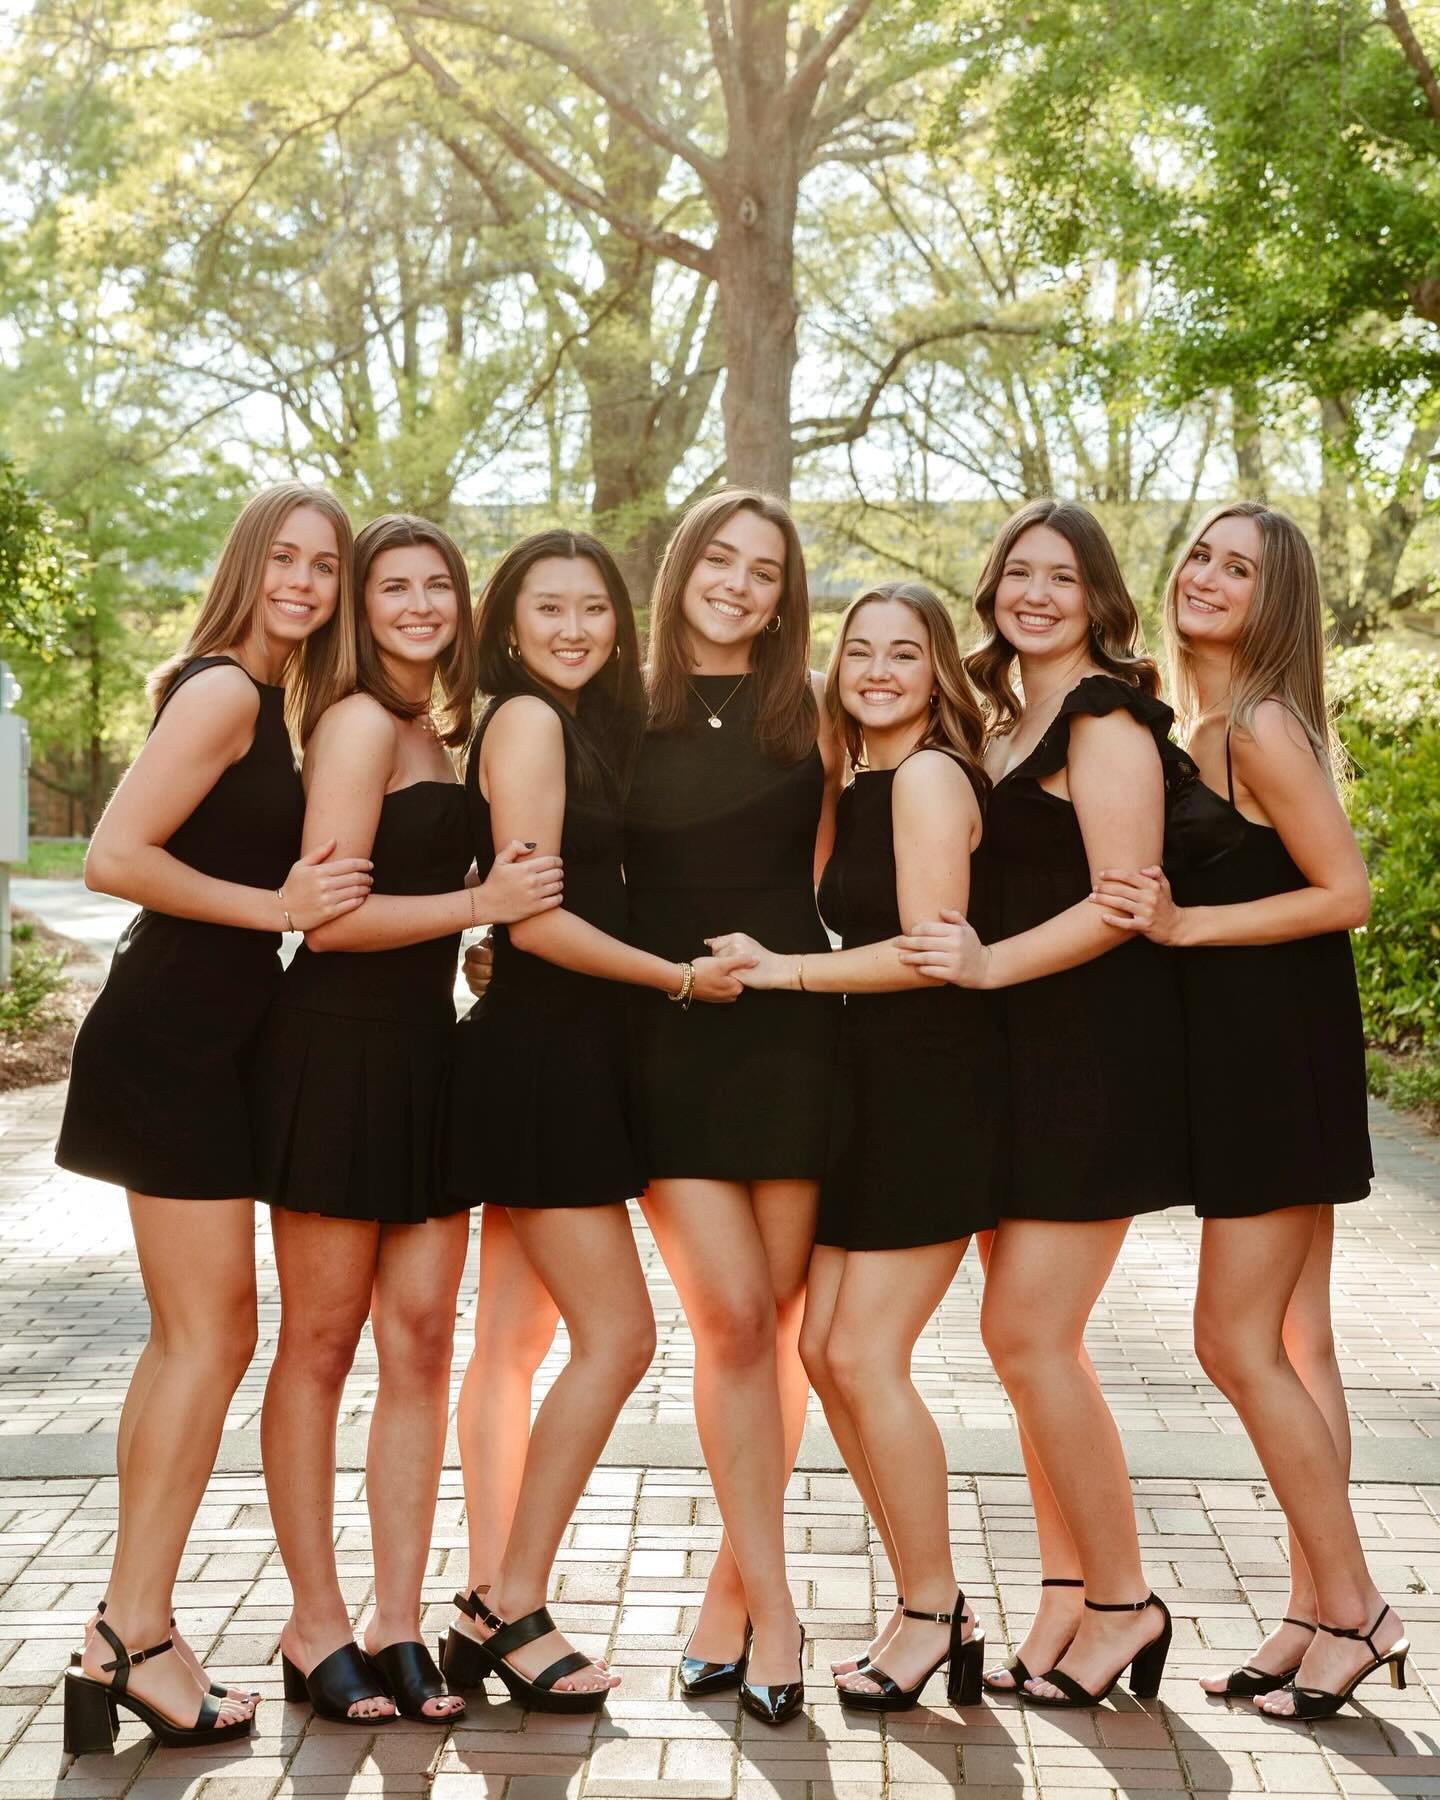 HAPPY DECISION DAY!! we are so excited for GT&rsquo; 28!
here is a #panlove letter from some of our seniors about what makes our community so special💛🎓

&ldquo;Despite starting at Tech during COVID &amp; joining different sororities, the seven of u